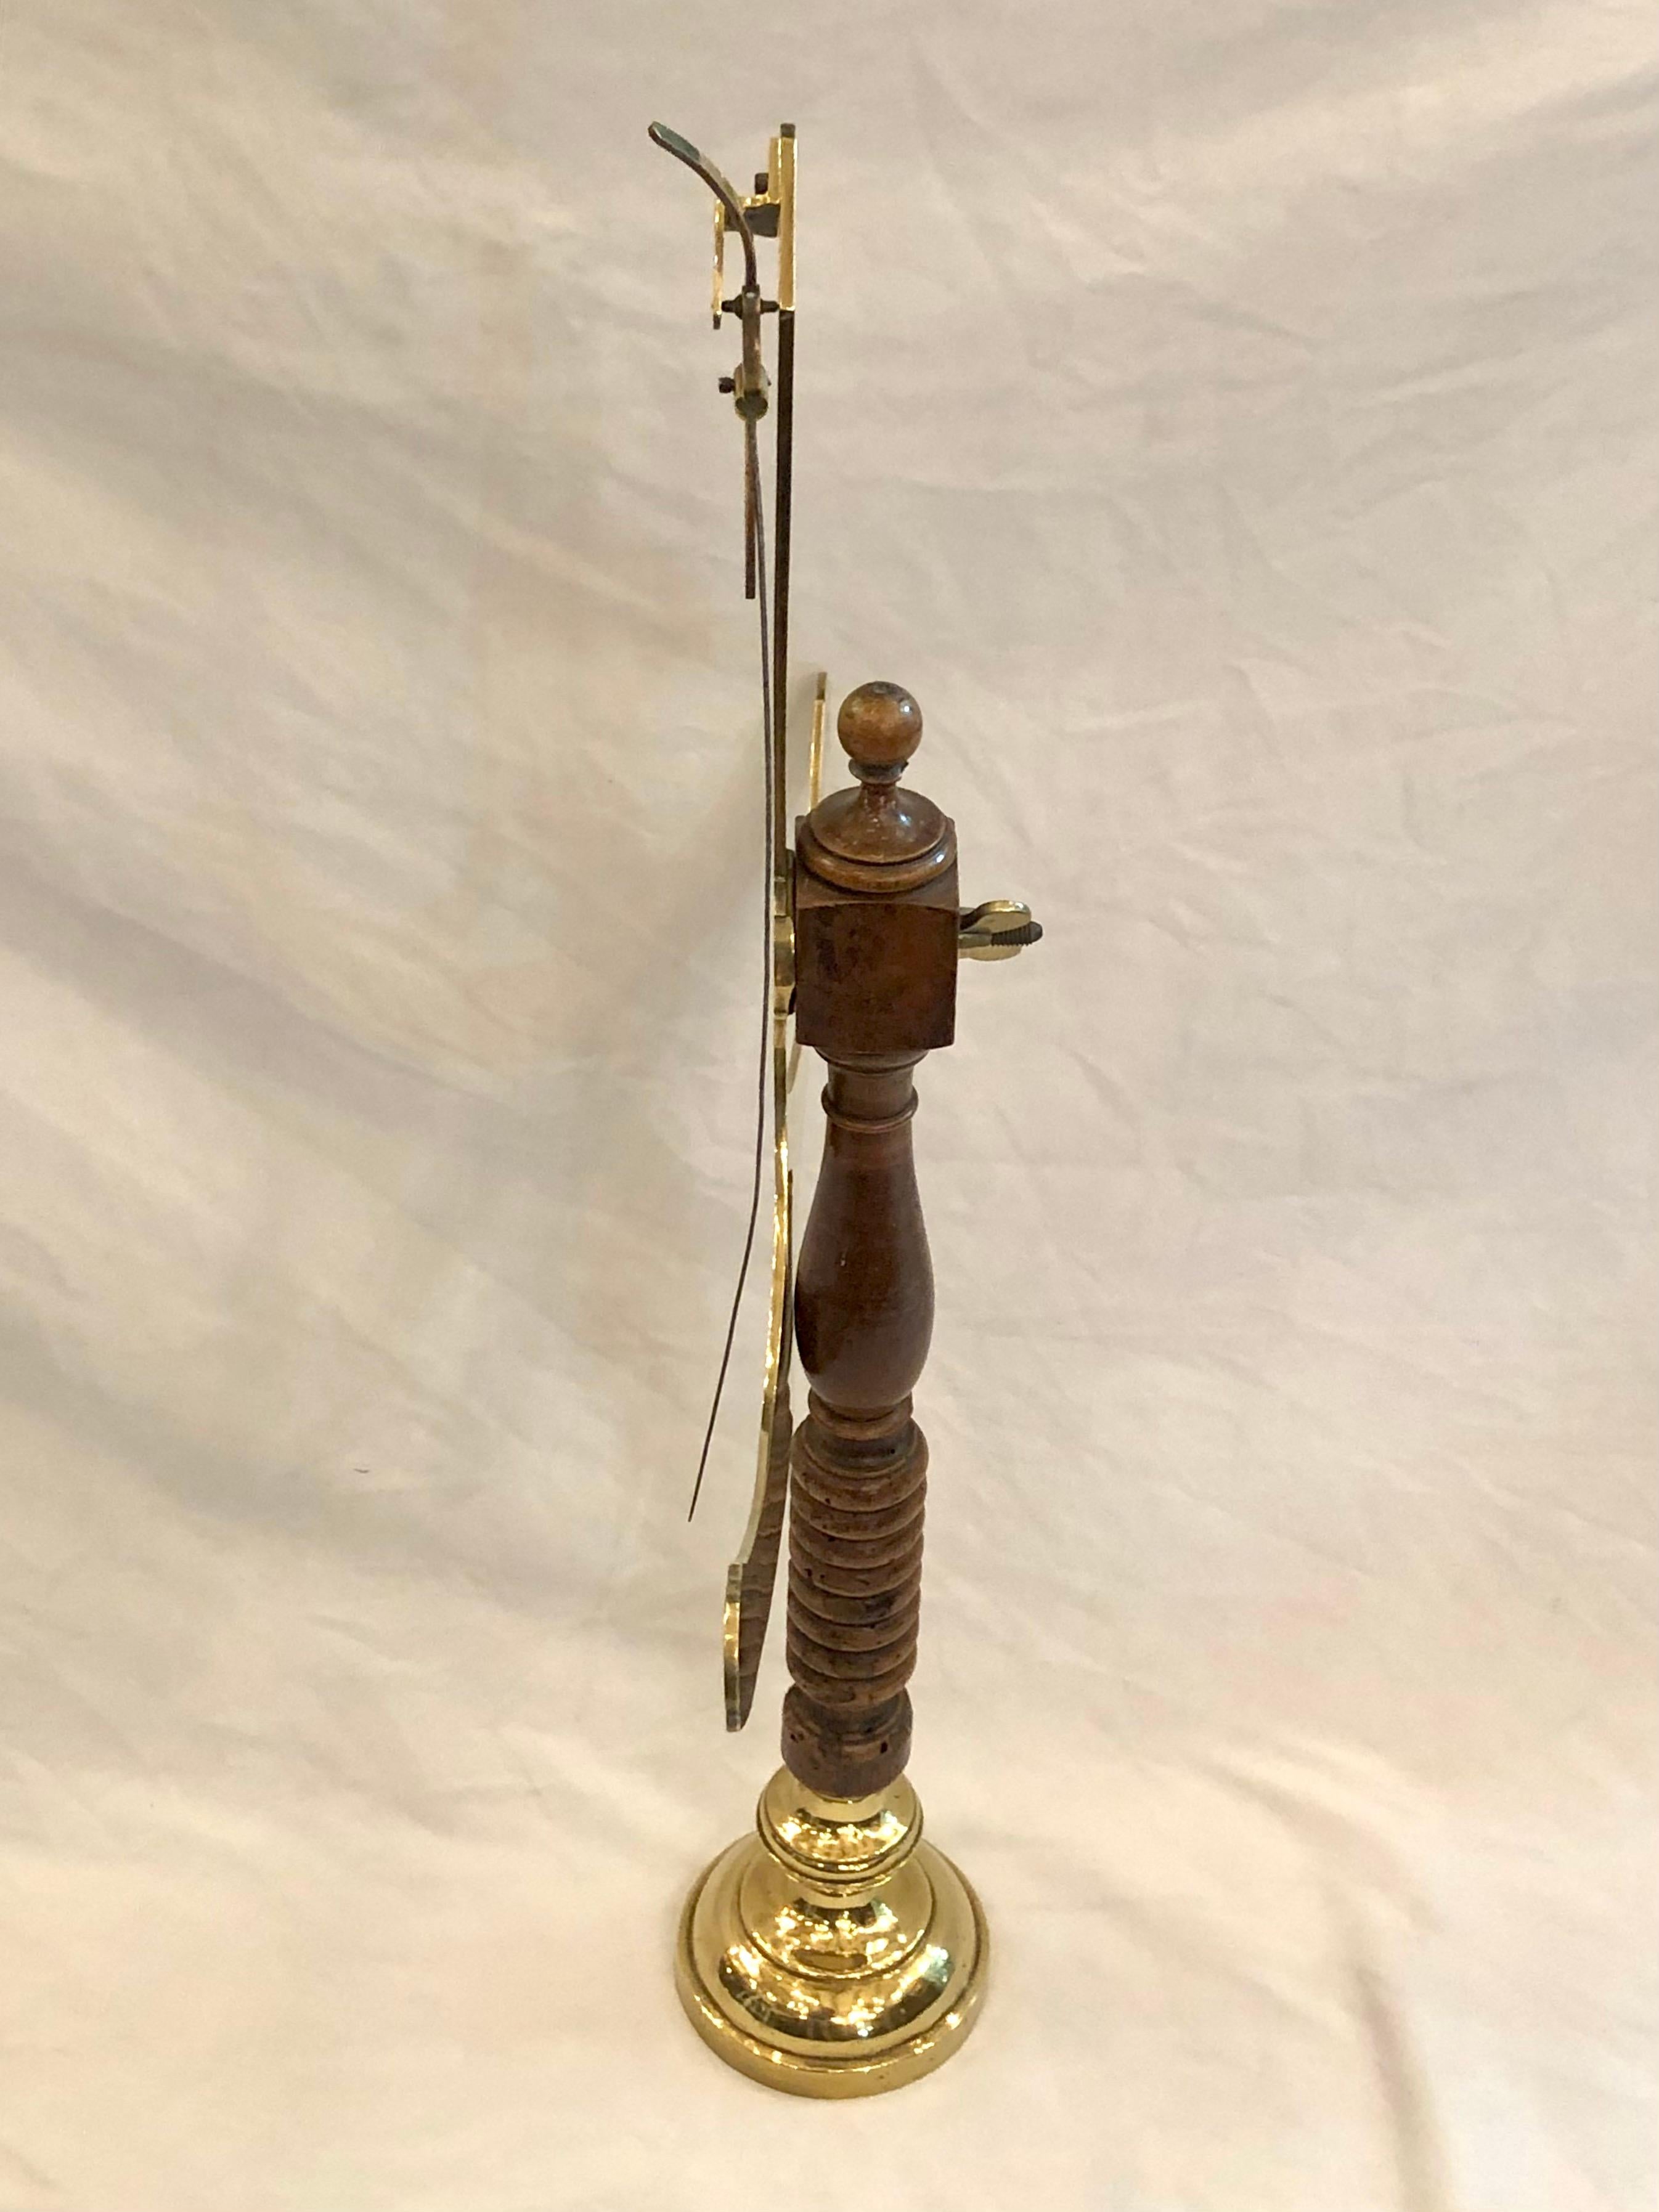 Antique 18th Century French Bronze Scientific Silk-Weighing Instrument 1789-1795 In Good Condition For Sale In New Orleans, LA